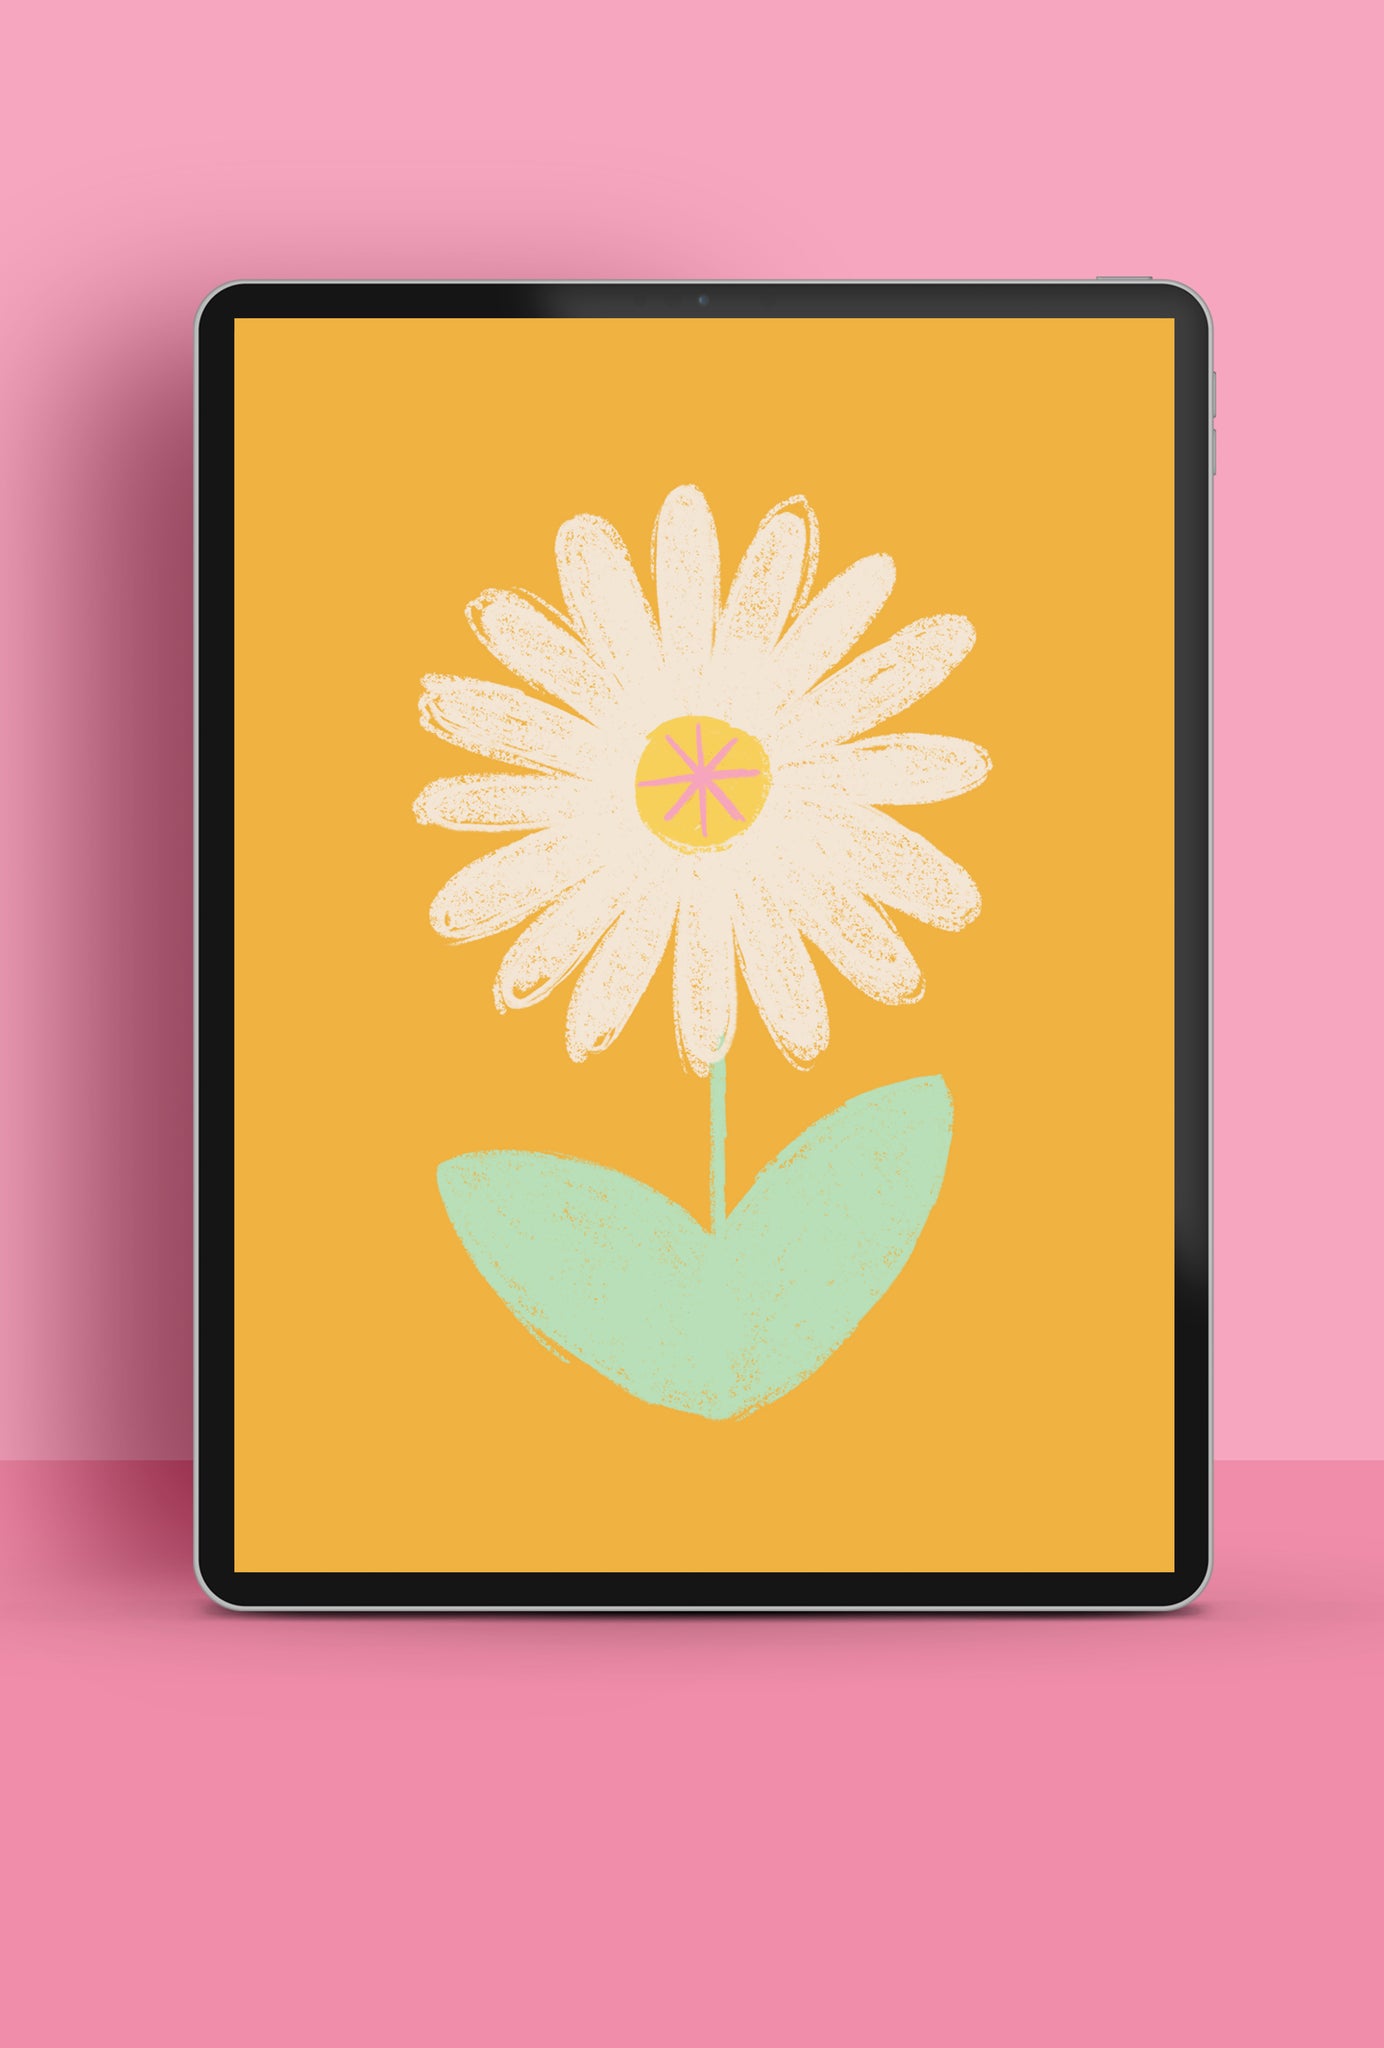 colourful illustrated daisy with mustard background tablet wallpaper